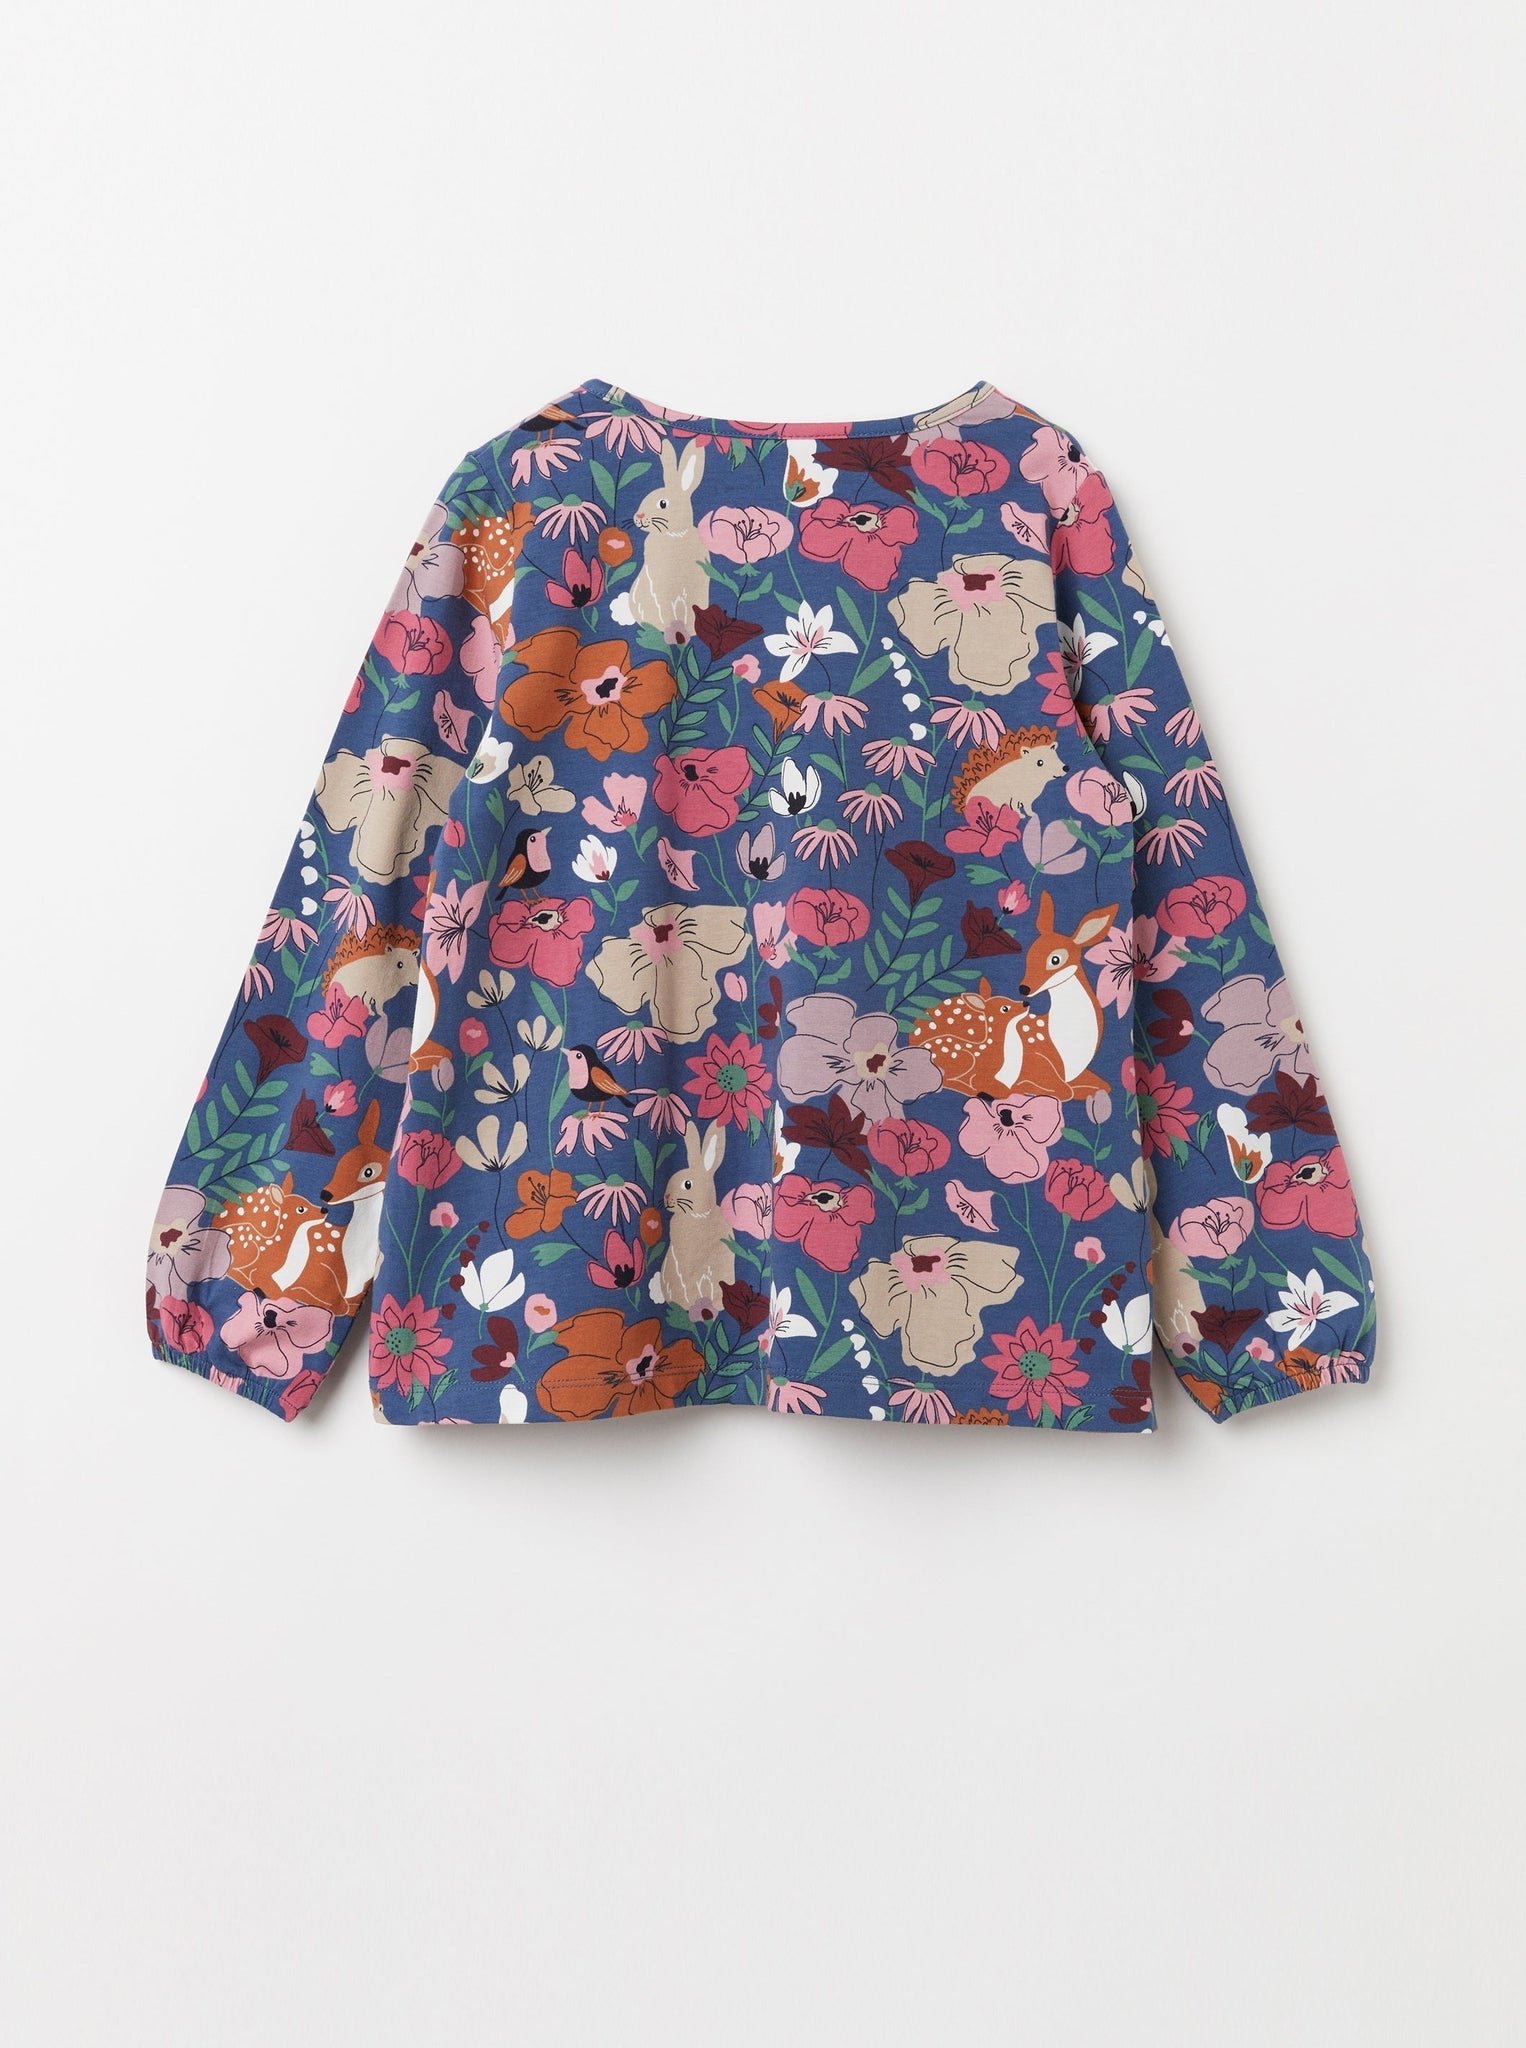 Organic Cotton Floral Nordic Girls Top from the Polarn O. Pyret Kidswear collection. Nordic kids clothes made from sustainable sources.